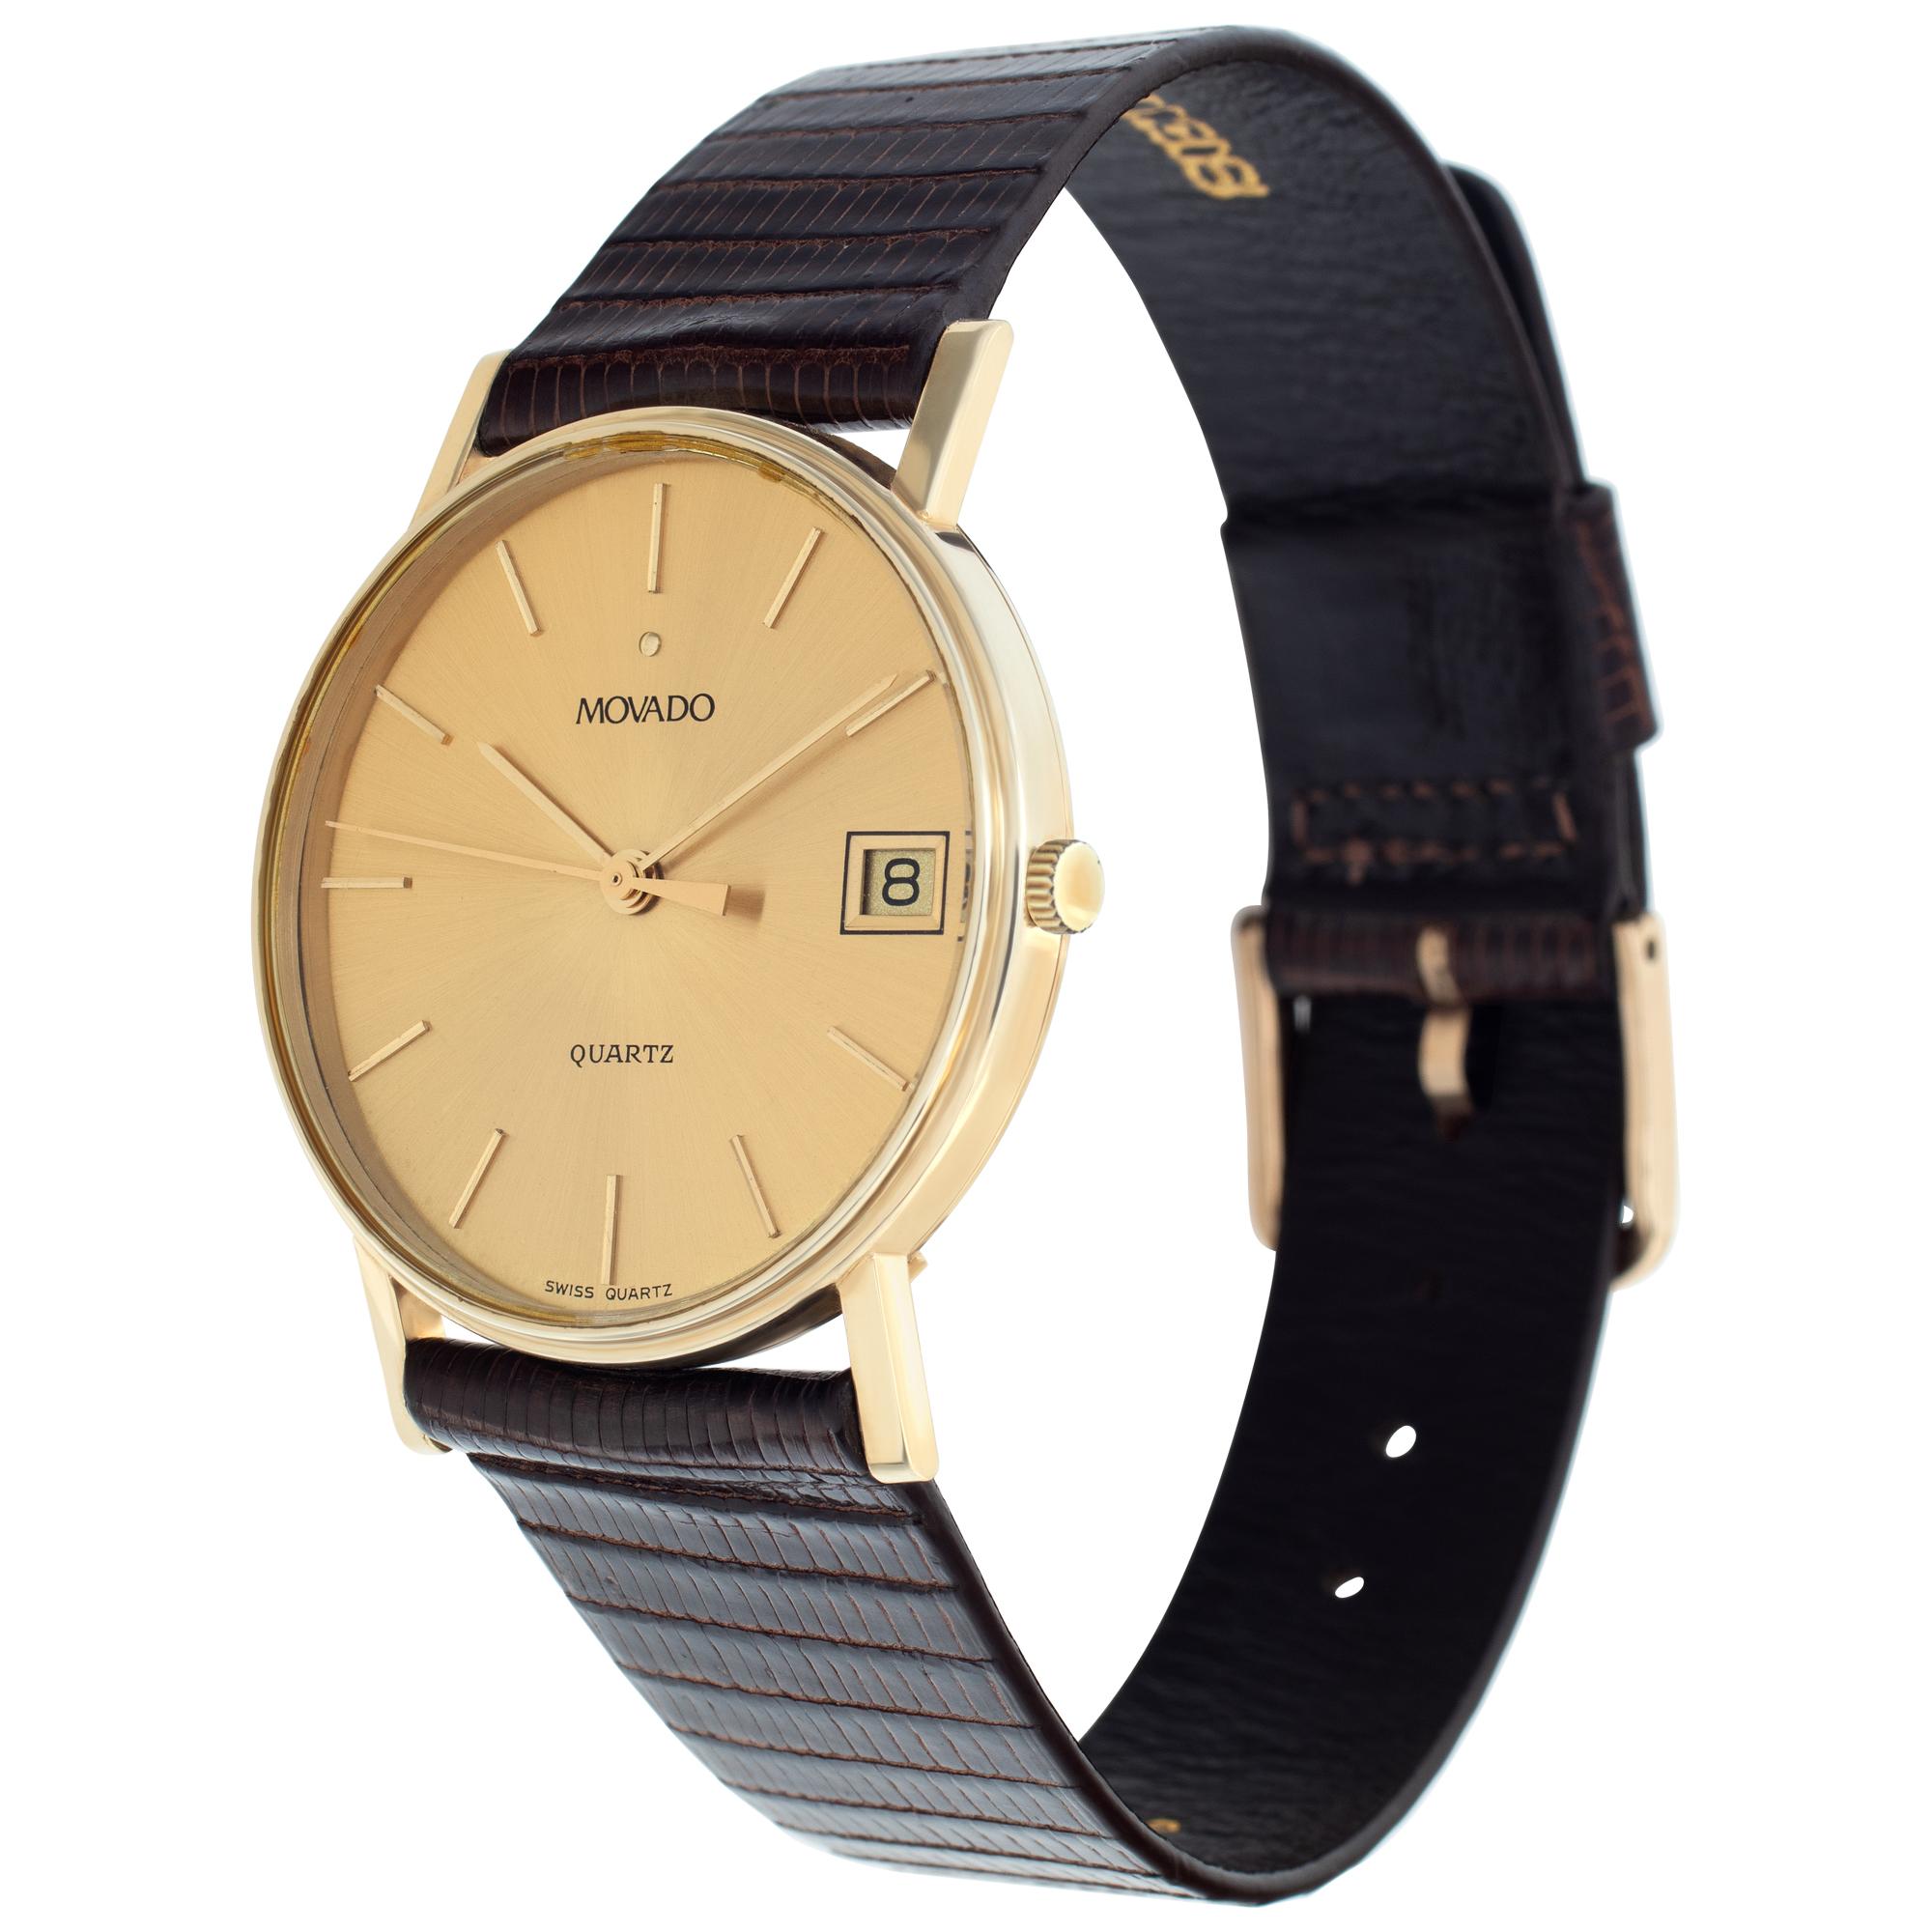 Movado Classic watch in 14k on brown lizard strap. Quartz w/ sweep seconds and calendar date. 31 mm case size. Ref 51157. Circa 1960s. Fine Pre-owned Movado Watch. Certified preowned Vintage Movado Classic 51157 watch is made out of yellow gold on a